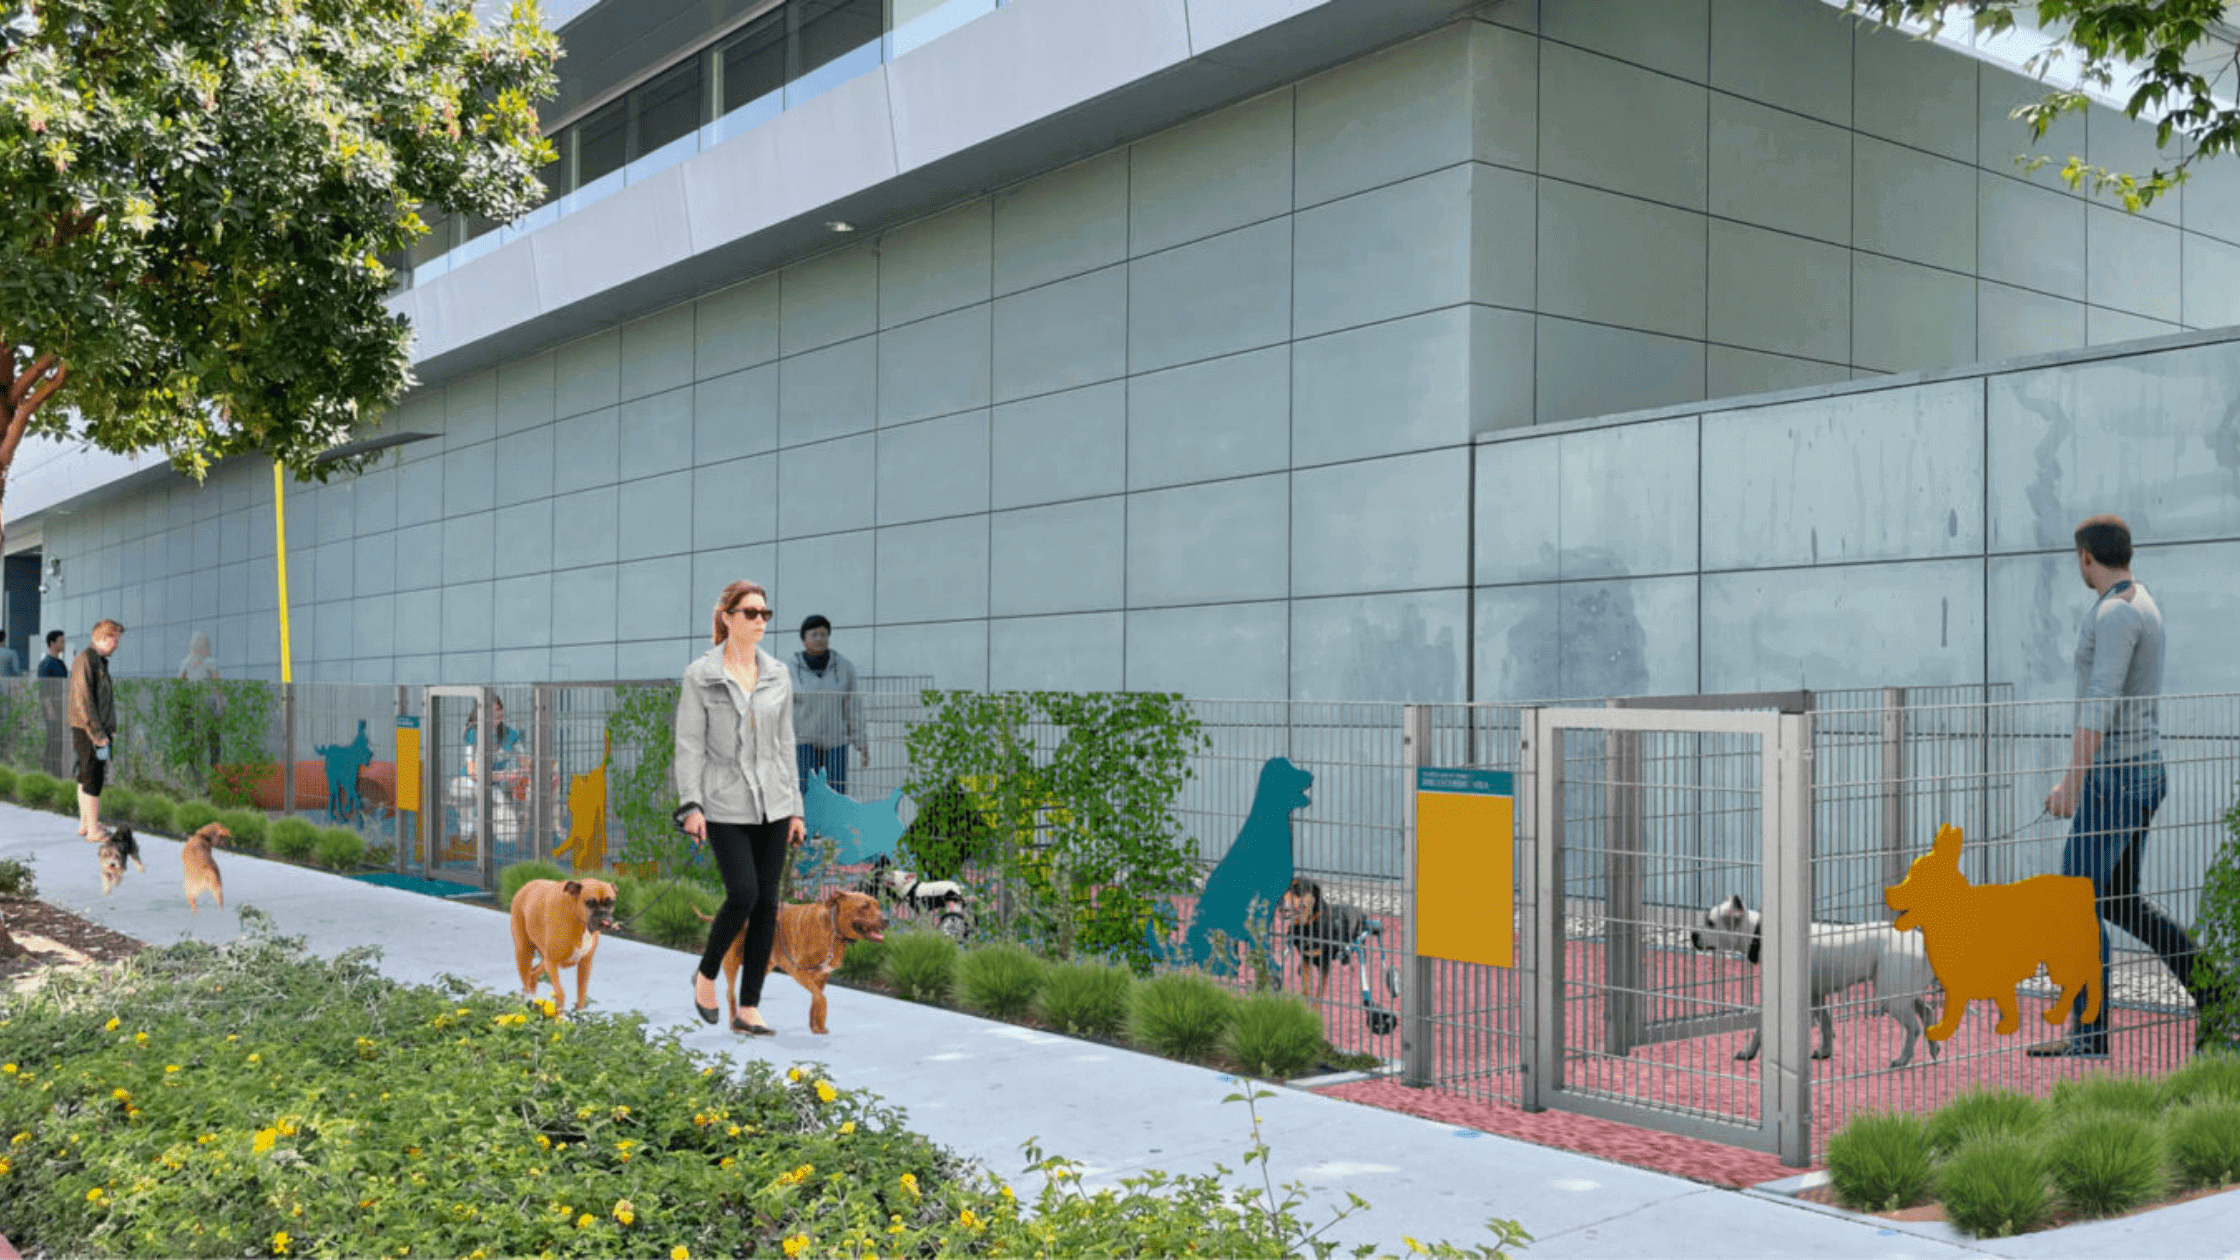 New Dog Park & Picnic Area Coming Soon to Downtown, Santa Monica